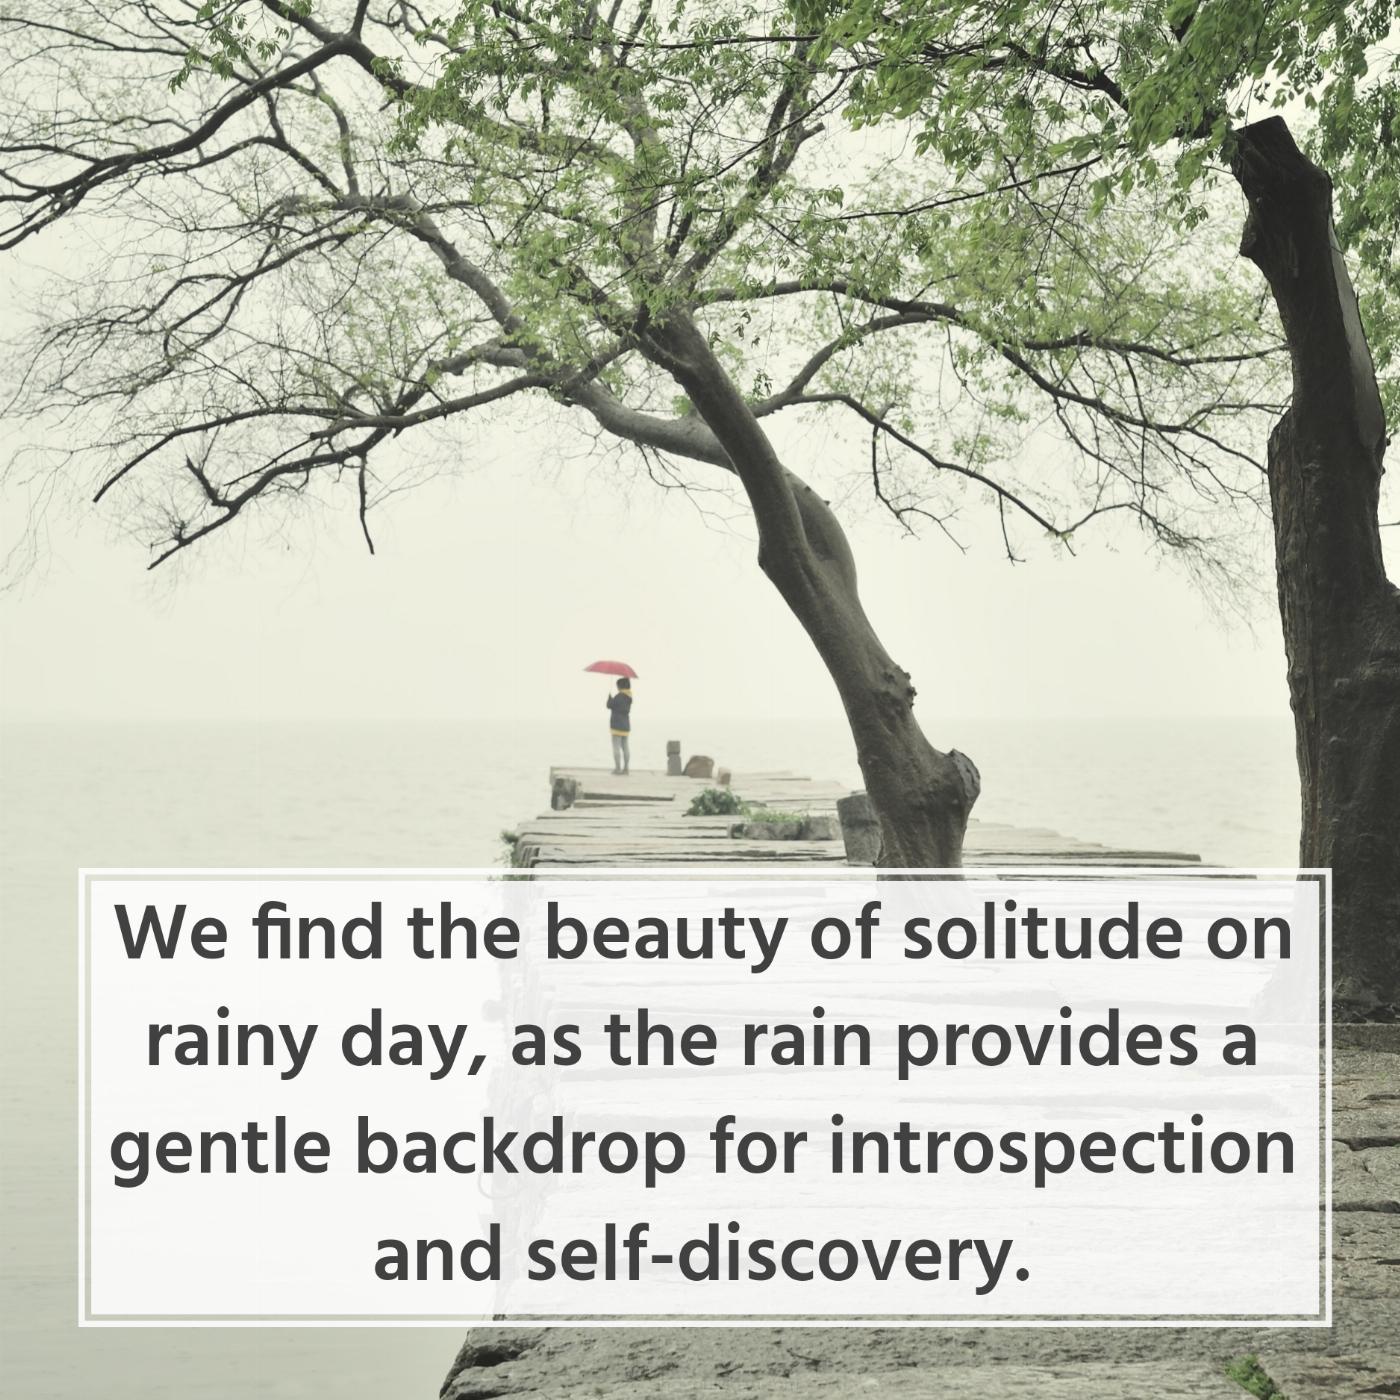 We find the beauty of solitude on rainy day